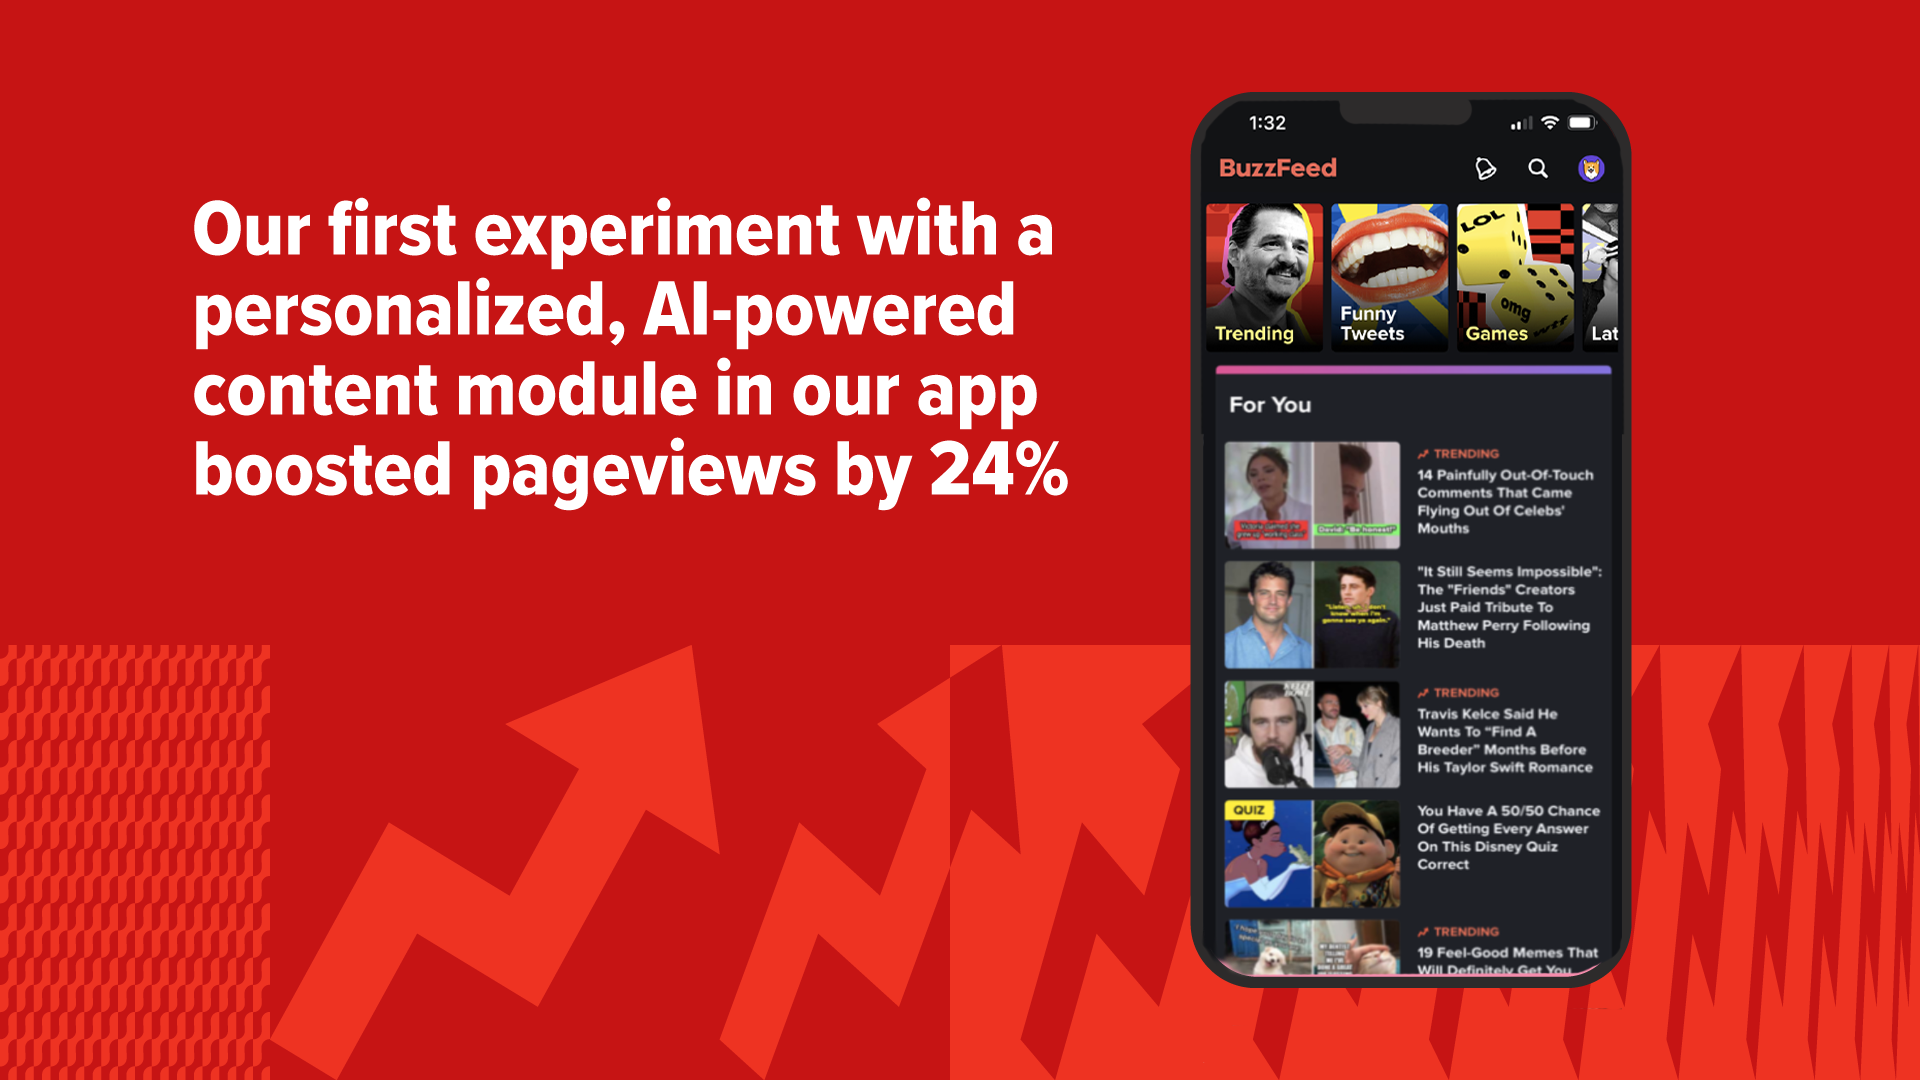 Advertisement for a content app showing a 24% increase in pageviews with AI personalization